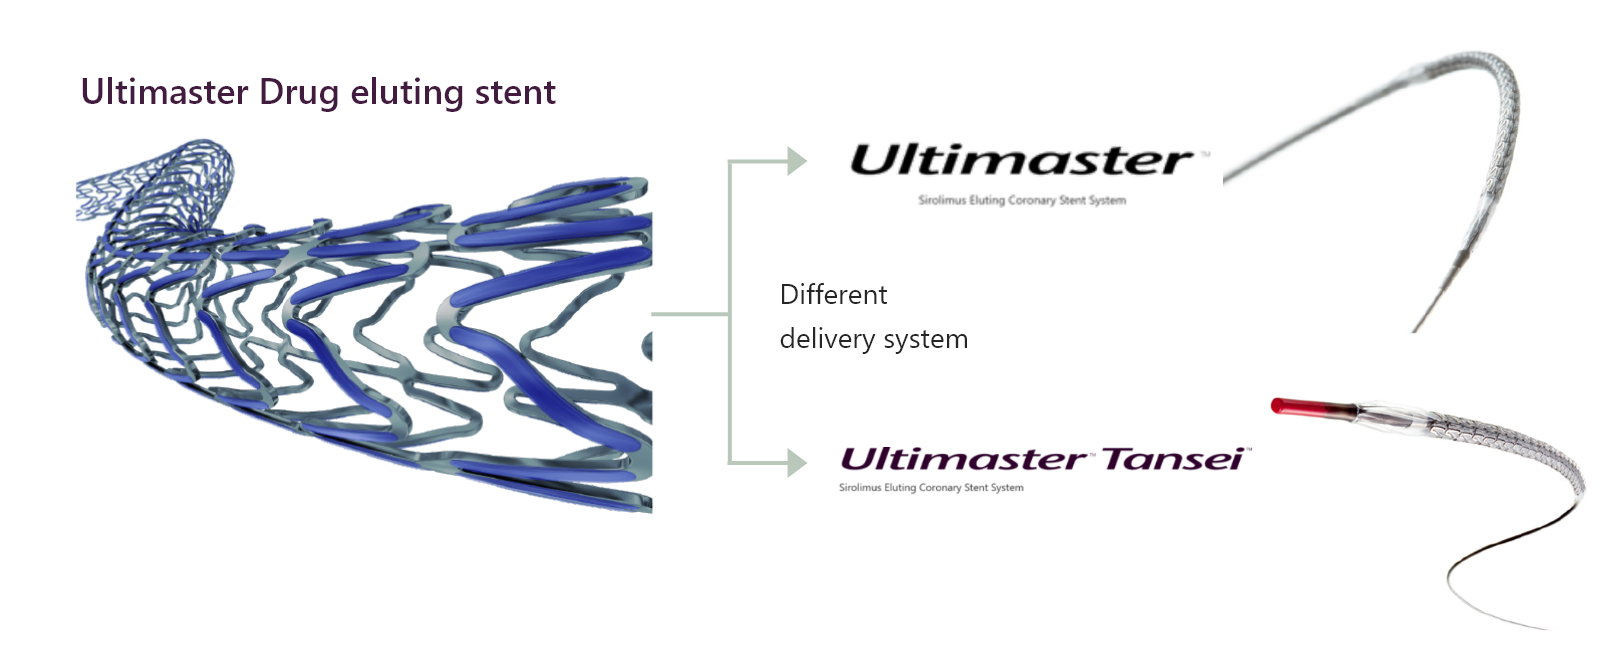 featured_ultimaster_faq_10.png